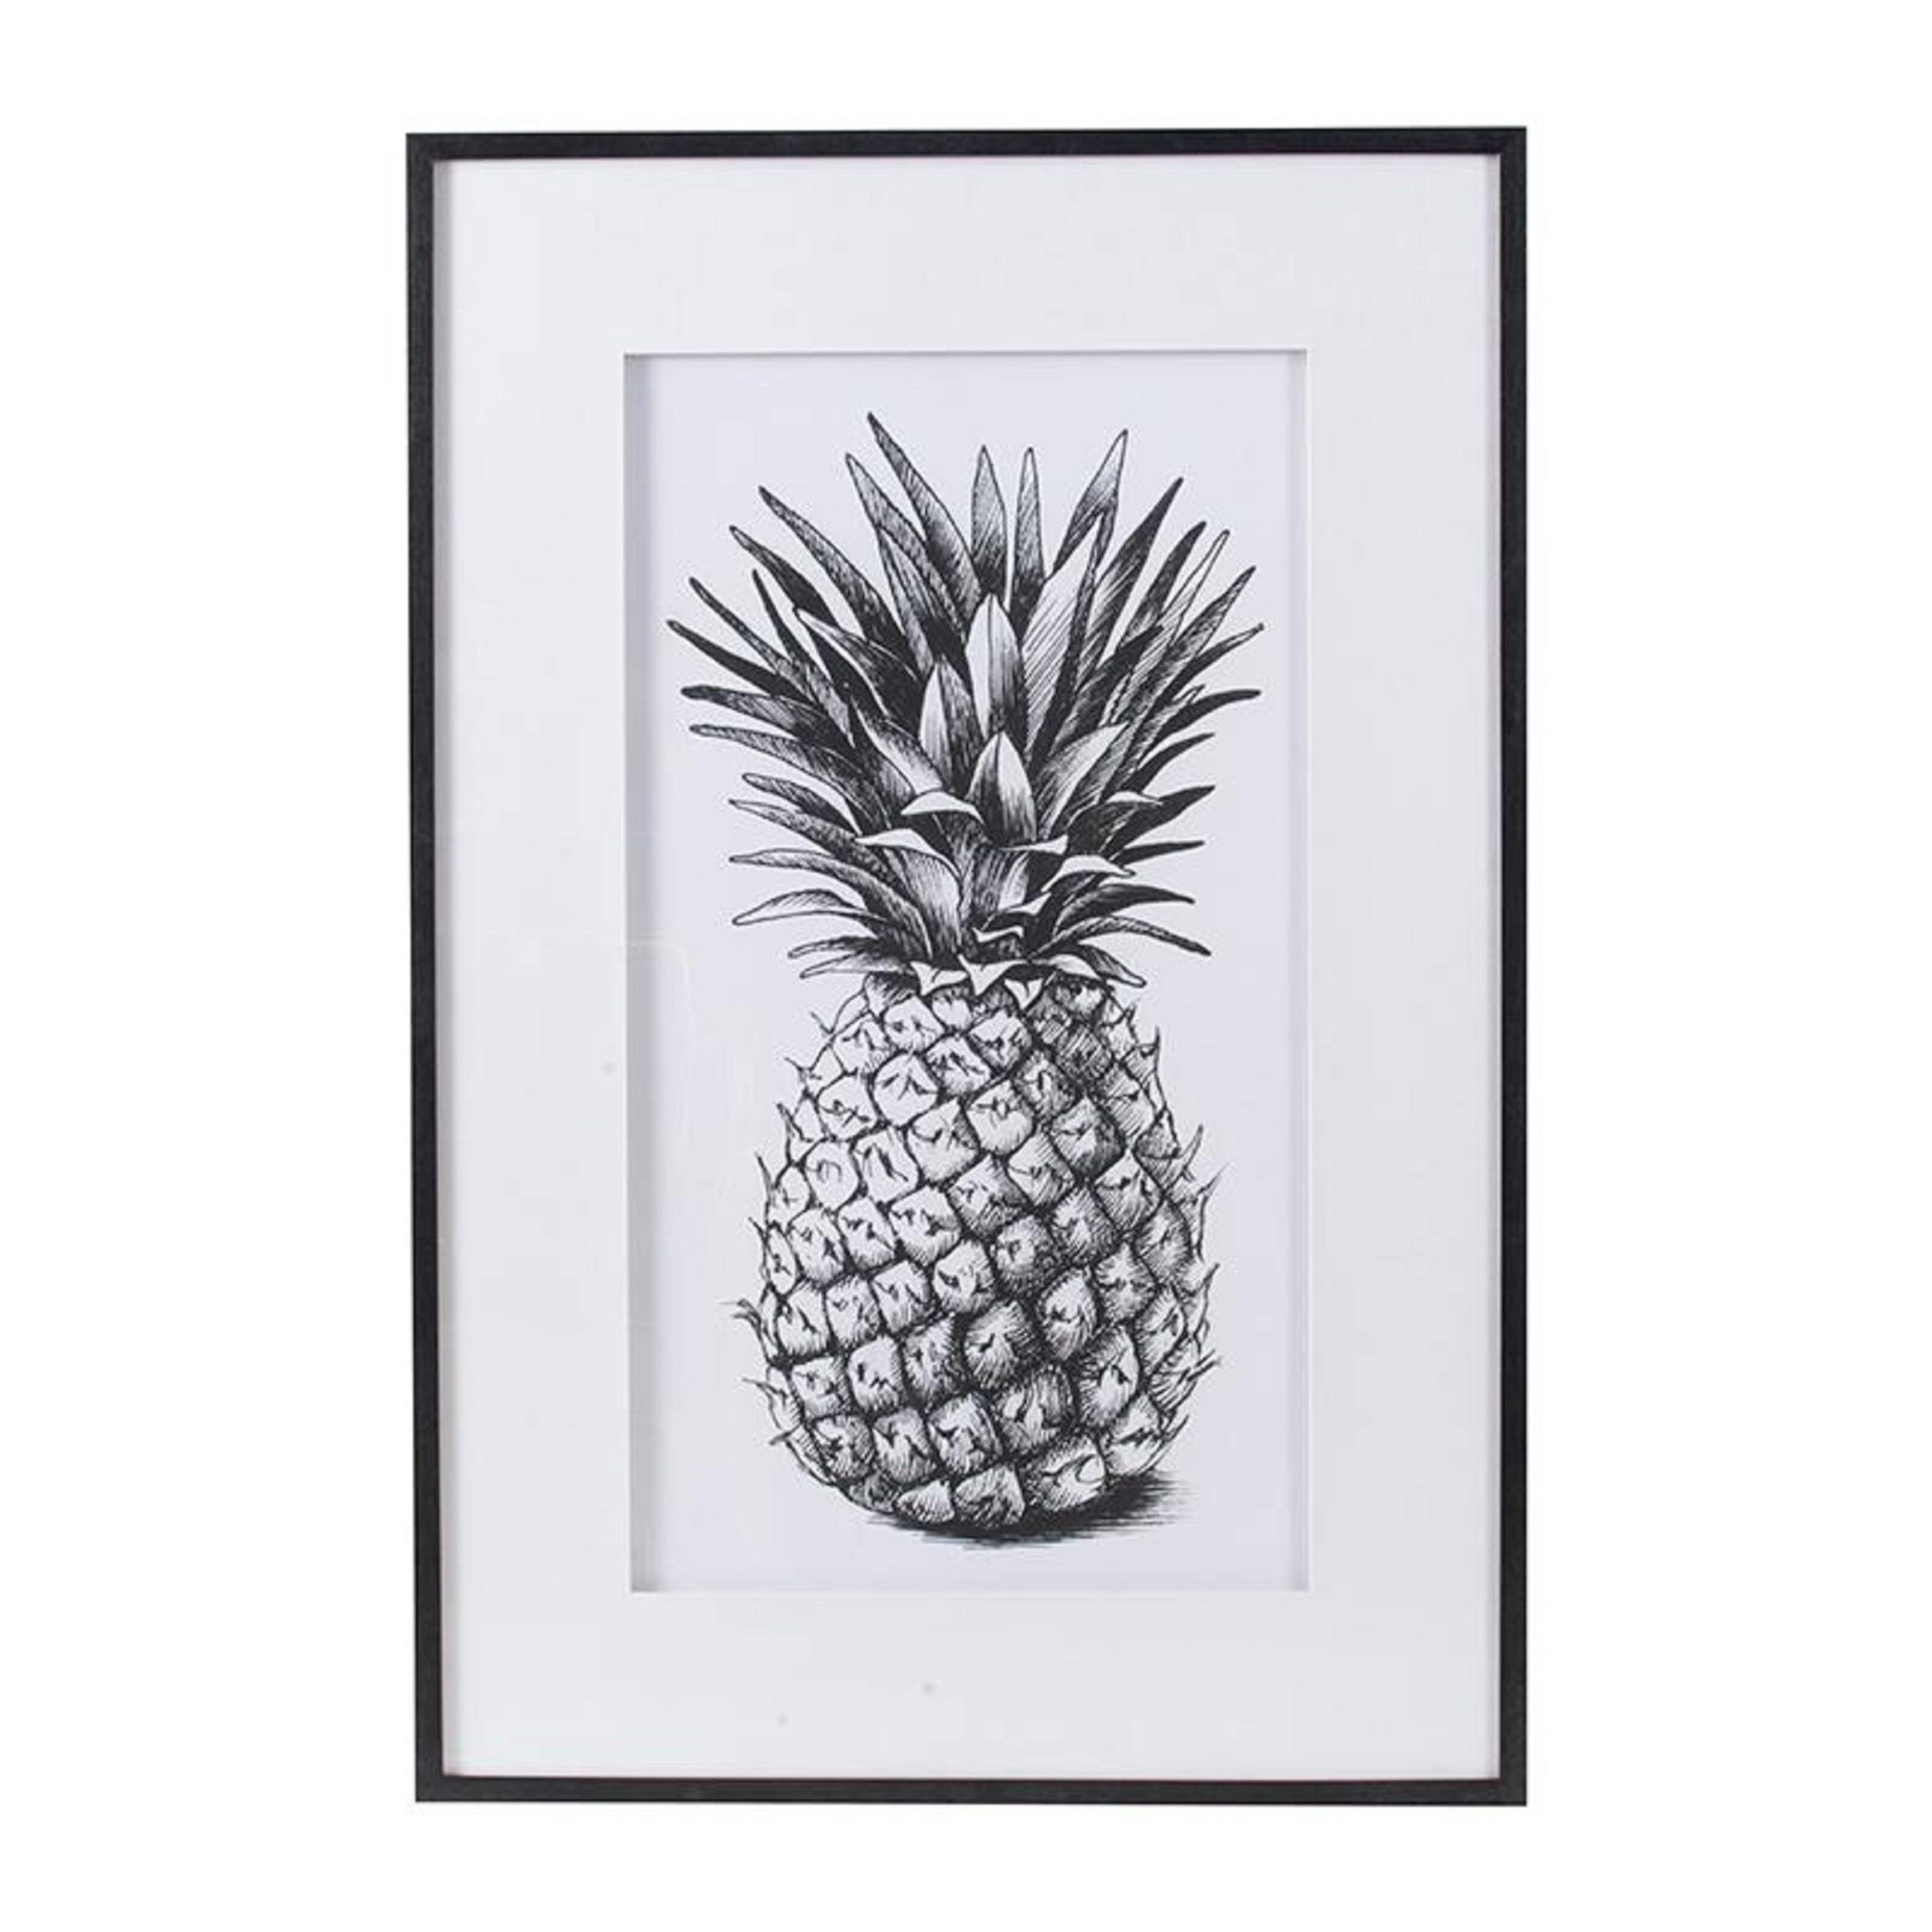 Frameless Monochrome Pineapple Canvas Oil Painting Picture Wall Art Decor 